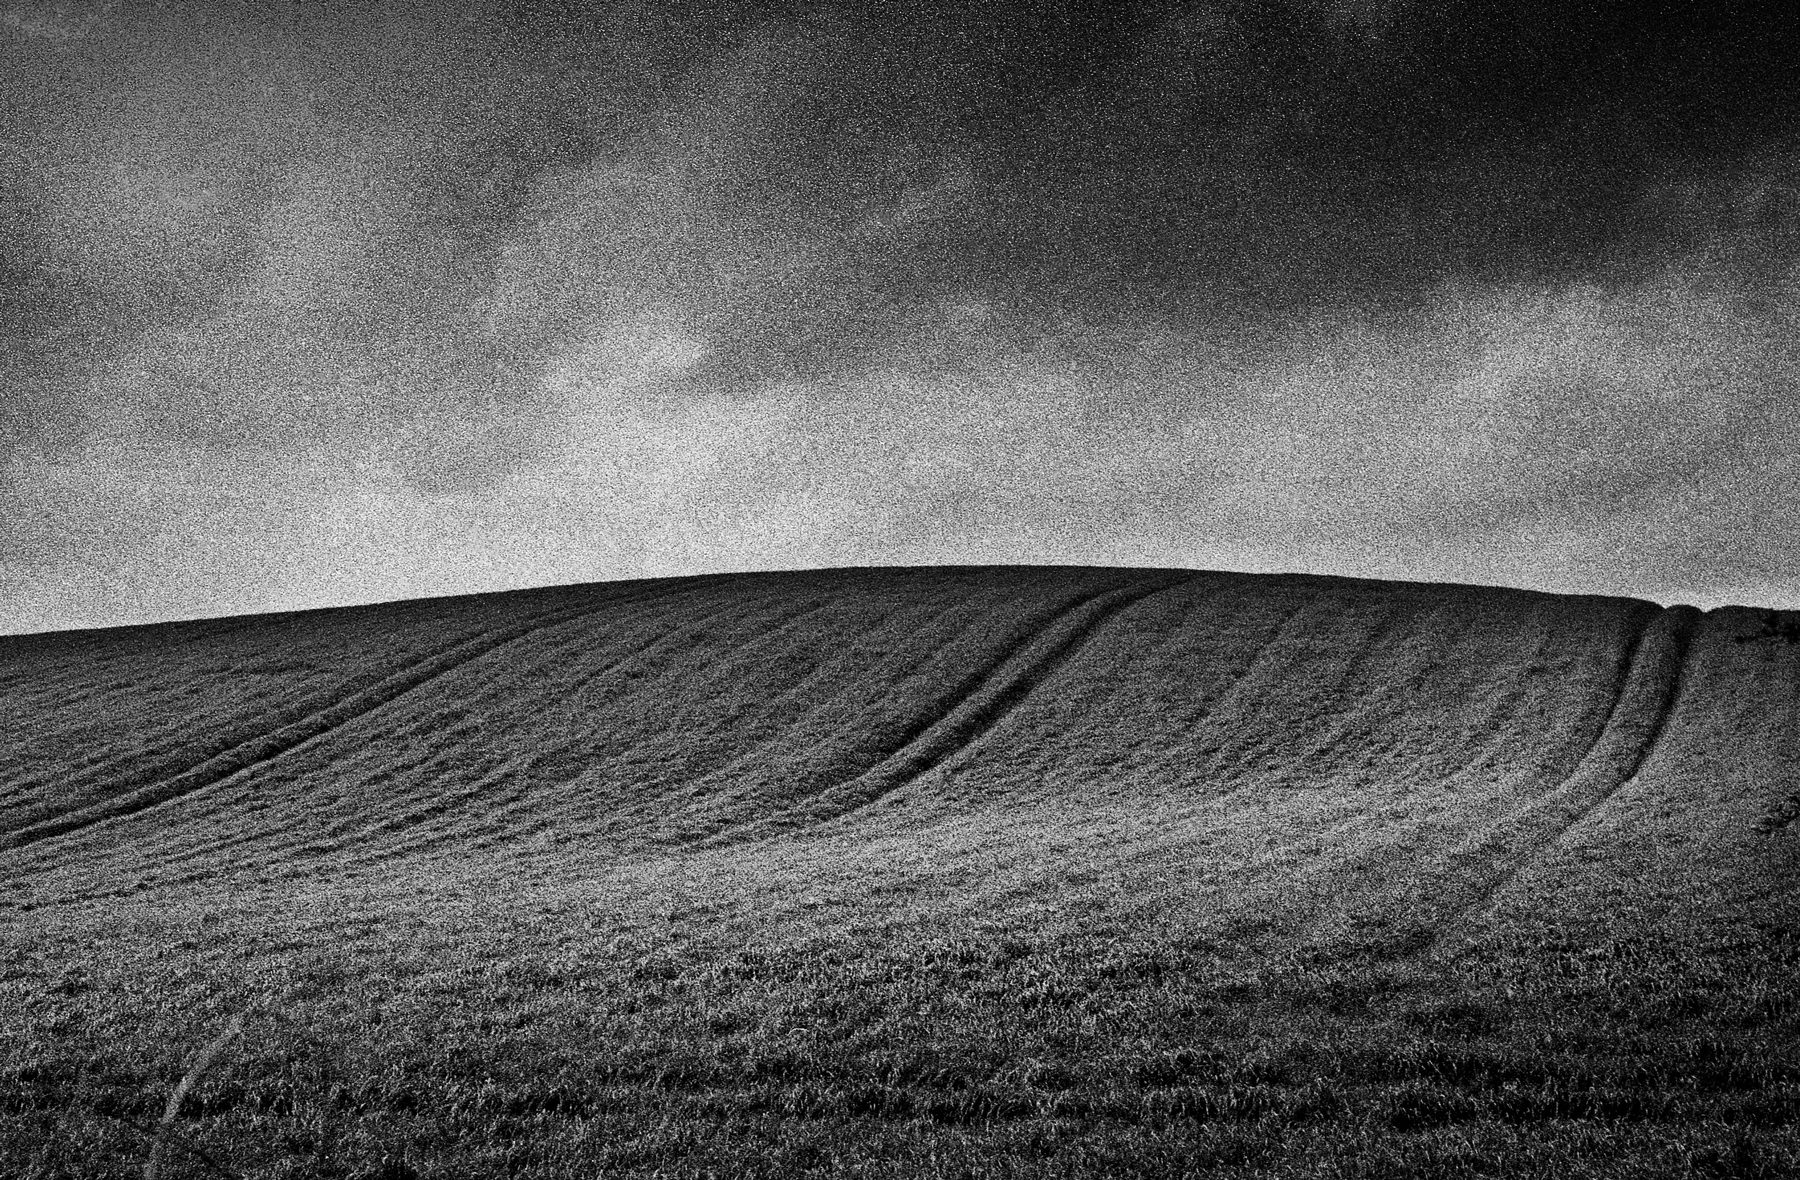 @PhilBixby Another for this week's #ilfordphoto #fridayfavourites #ilikegrain - again shot on Delta 3200 rated at 1600, Nikon F4 with Micro Nikkor 105mm f2.8 lens. Yorkshire in April.